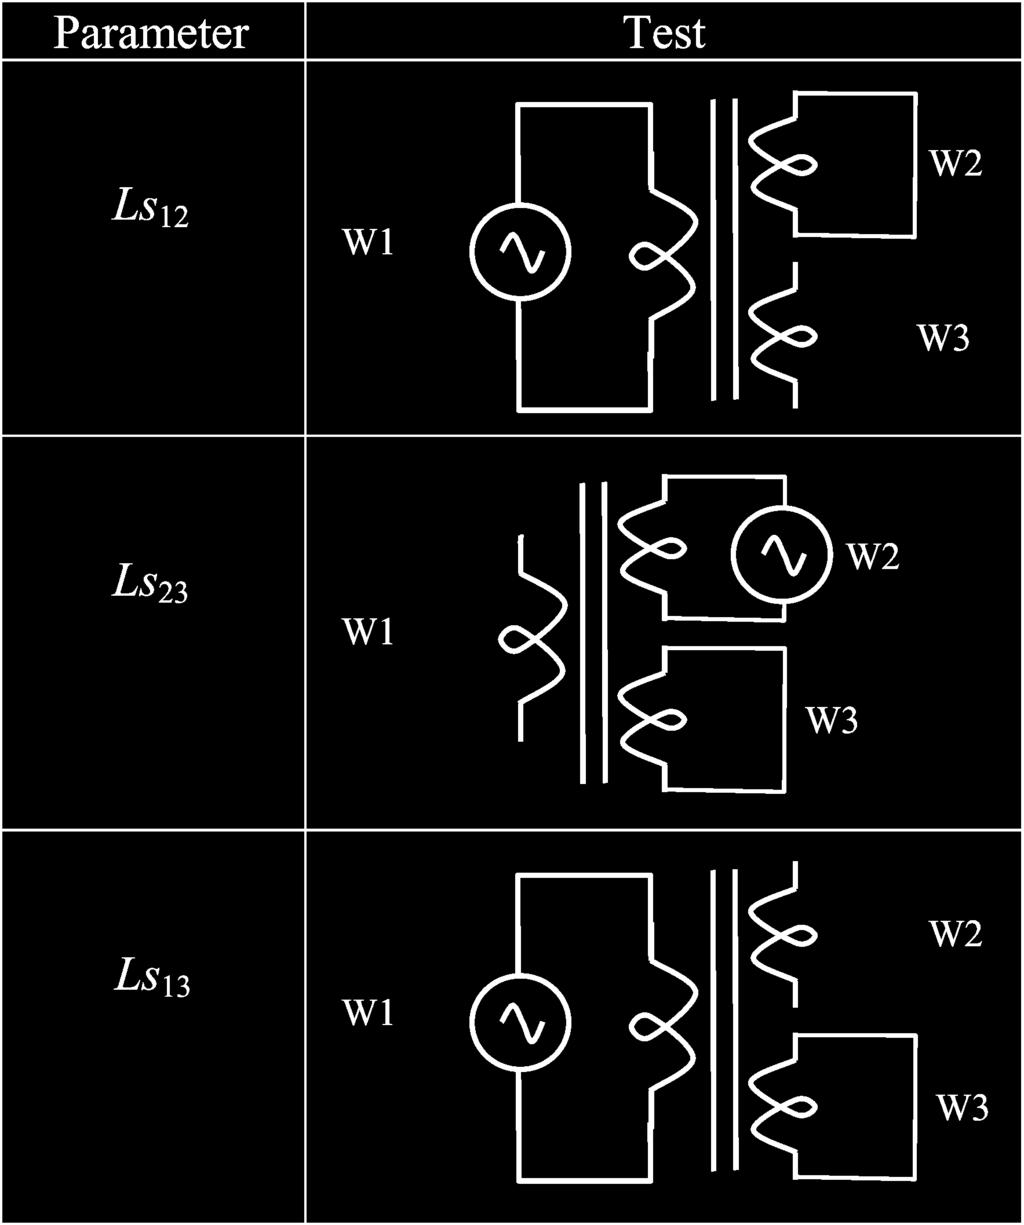 DE LEÓN AND MARTINEZ: DUAL THREE-WINDING TRANSFORMER EQUIVALENT 161 TABLE I LEAKAGE INDUCTANCE TESTS FOR A THREE-WINDING TRANSFORMER Fig. 2.